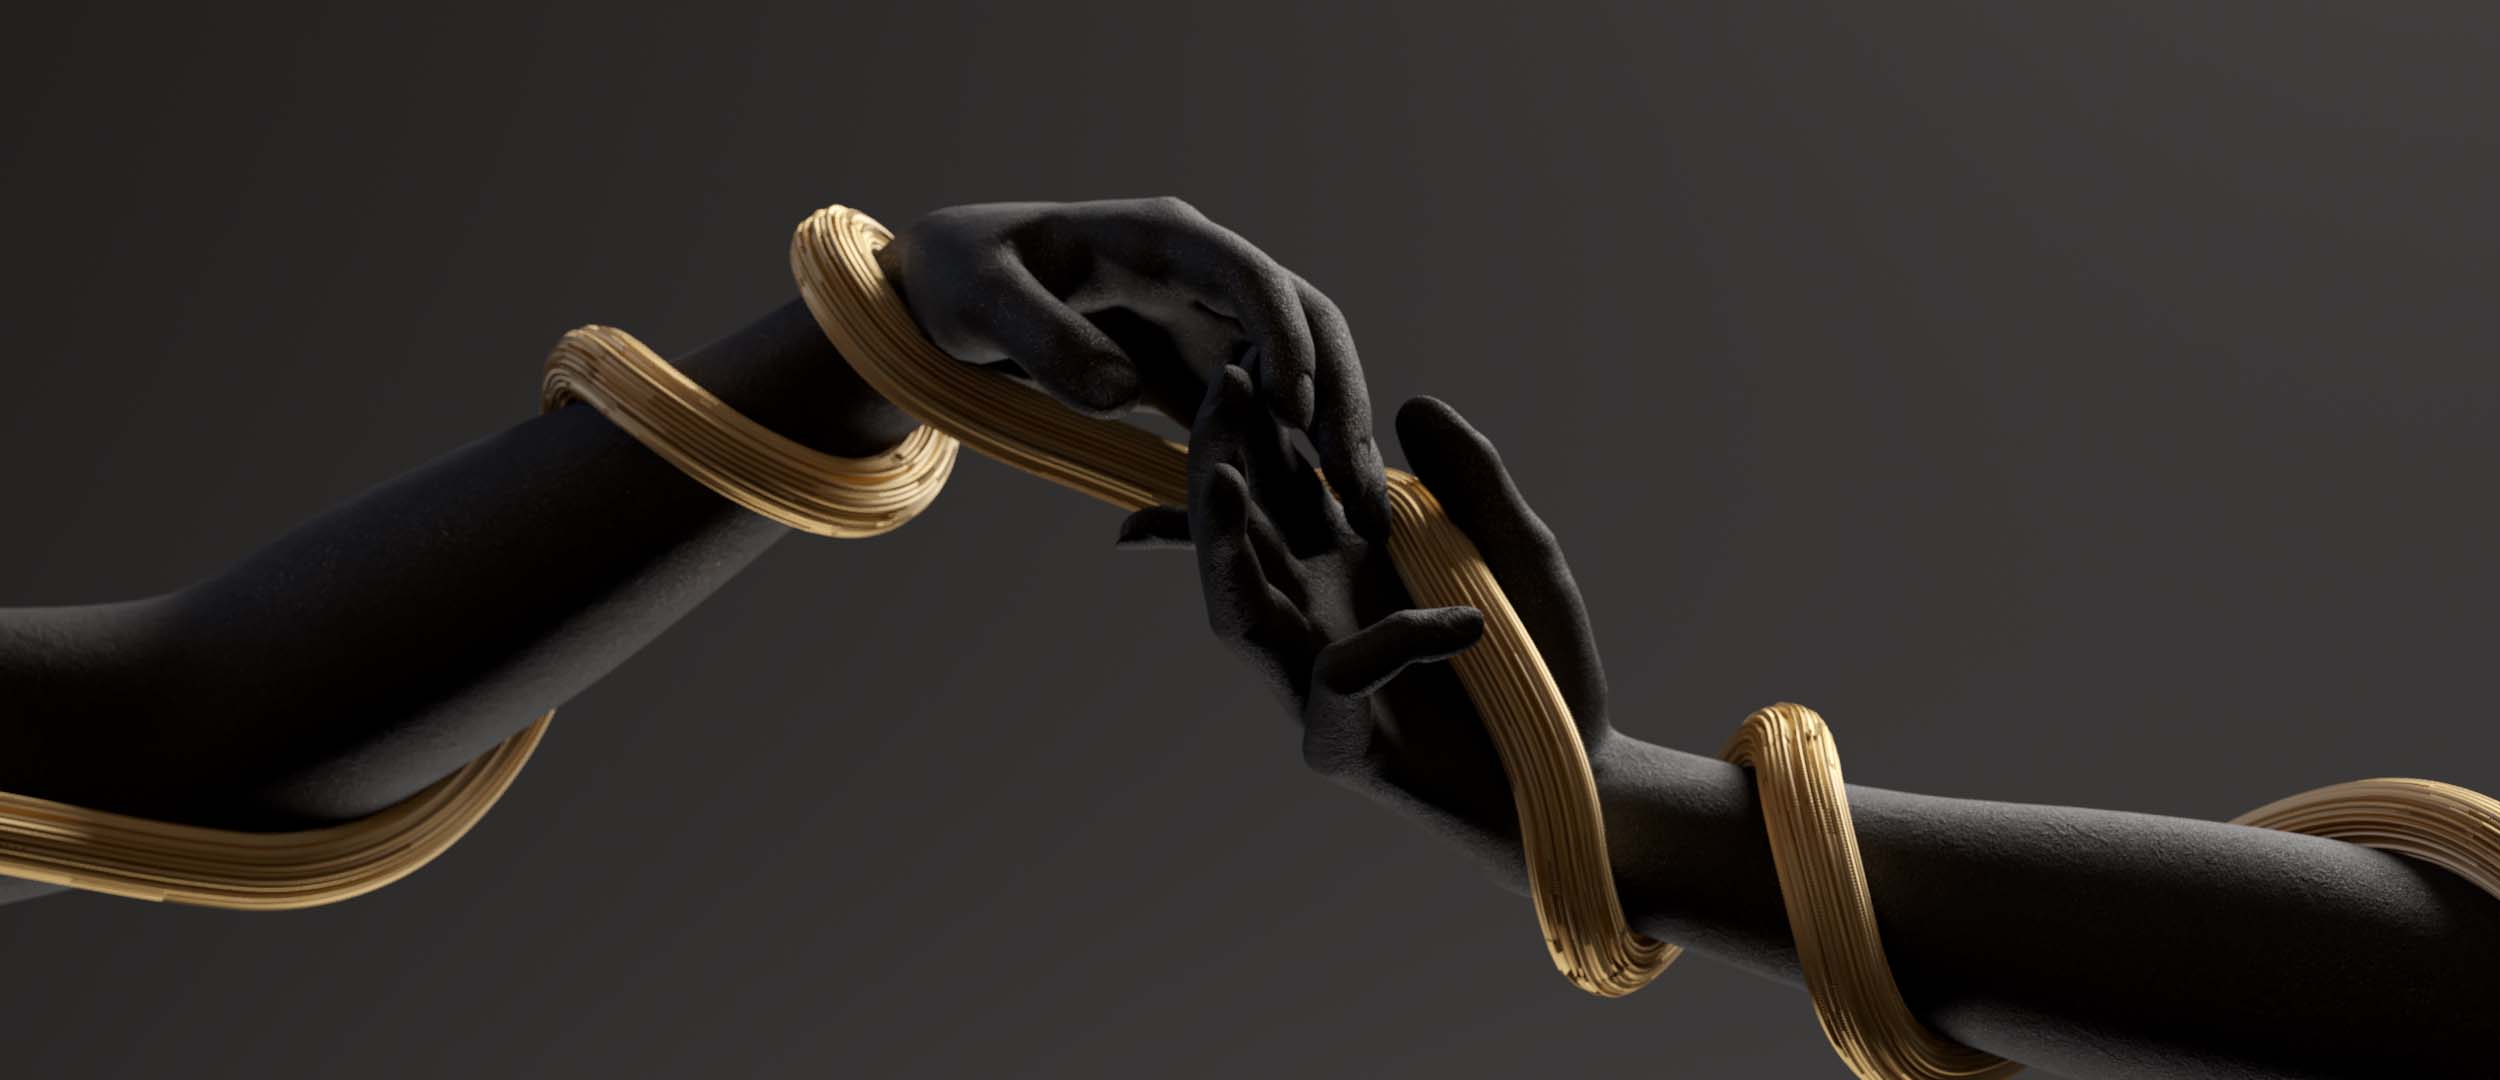 design-motion-3d-photography-octane-redshift-art-visual-animation-render-style-graphic-gold-hesibition-emirates-luxury-diamond-black-precious-jewellery-contemporary-hand-woman-god